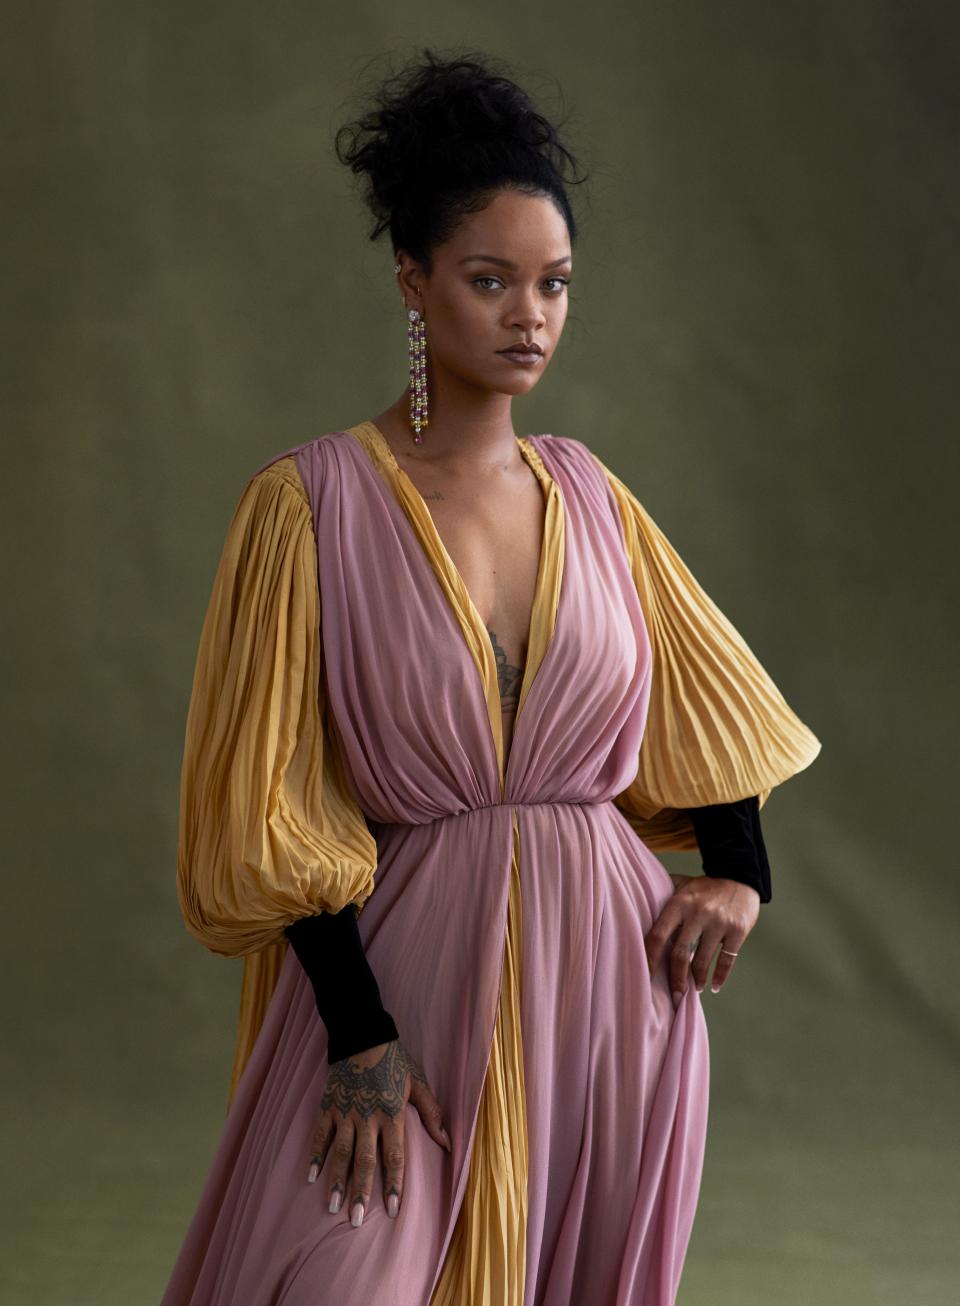 Future Perfect
Rihanna’s decision to be Fenty’s muse, says Dior’s Maria Grazia Chiuri, “speaks to the increasing need for women to be in charge of their appearance, their bodies, and their lives.” Gucci dress and Maria Tash earrings. In this story: hair, Yusef Williams; makeup, Kanako Takase.